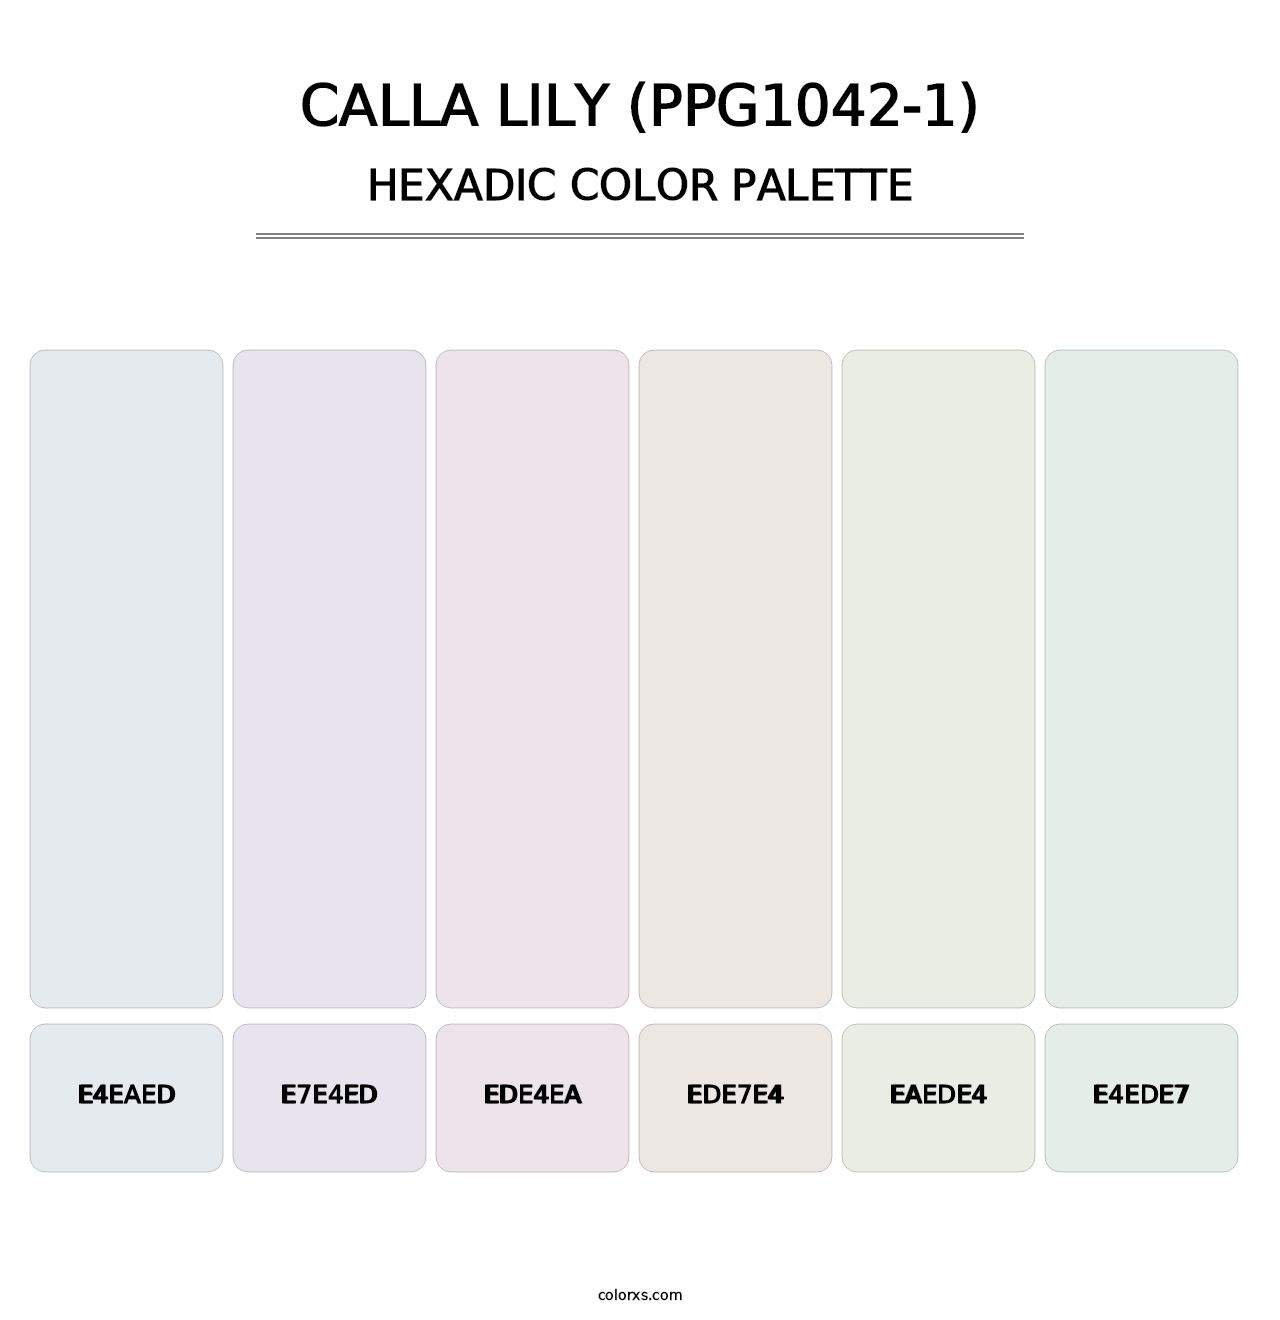 Calla Lily (PPG1042-1) - Hexadic Color Palette